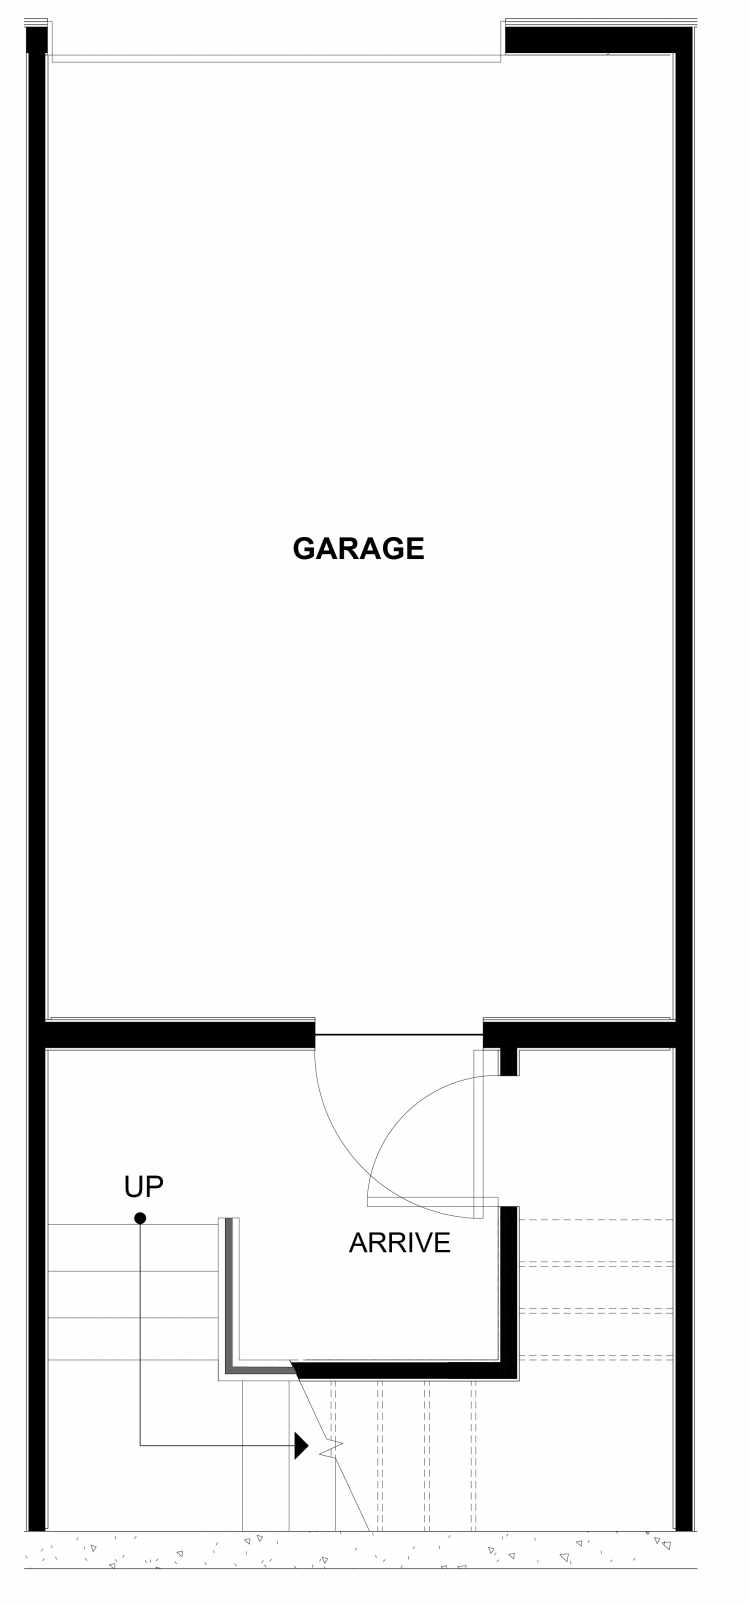 First Floor Plan of 1542 15th Ave E, One of the Grandview Townhomes in Capitol Hill